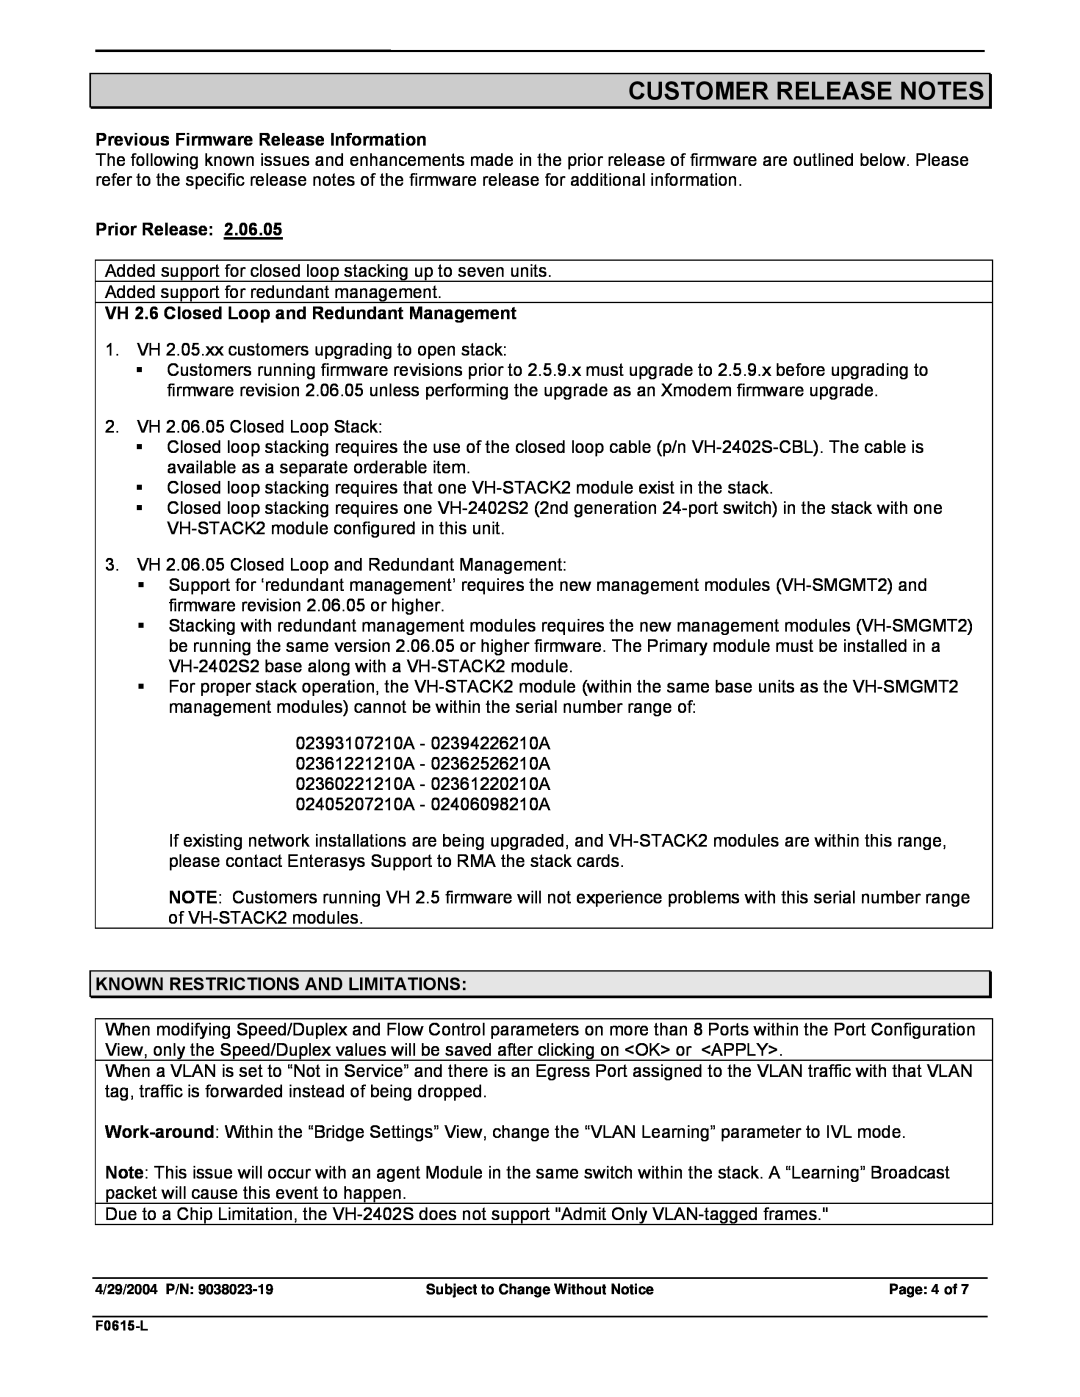 Enterasys Networks VH-2402S2 manual Customer Release Notes, Previous Firmware Release Information, Prior Release 